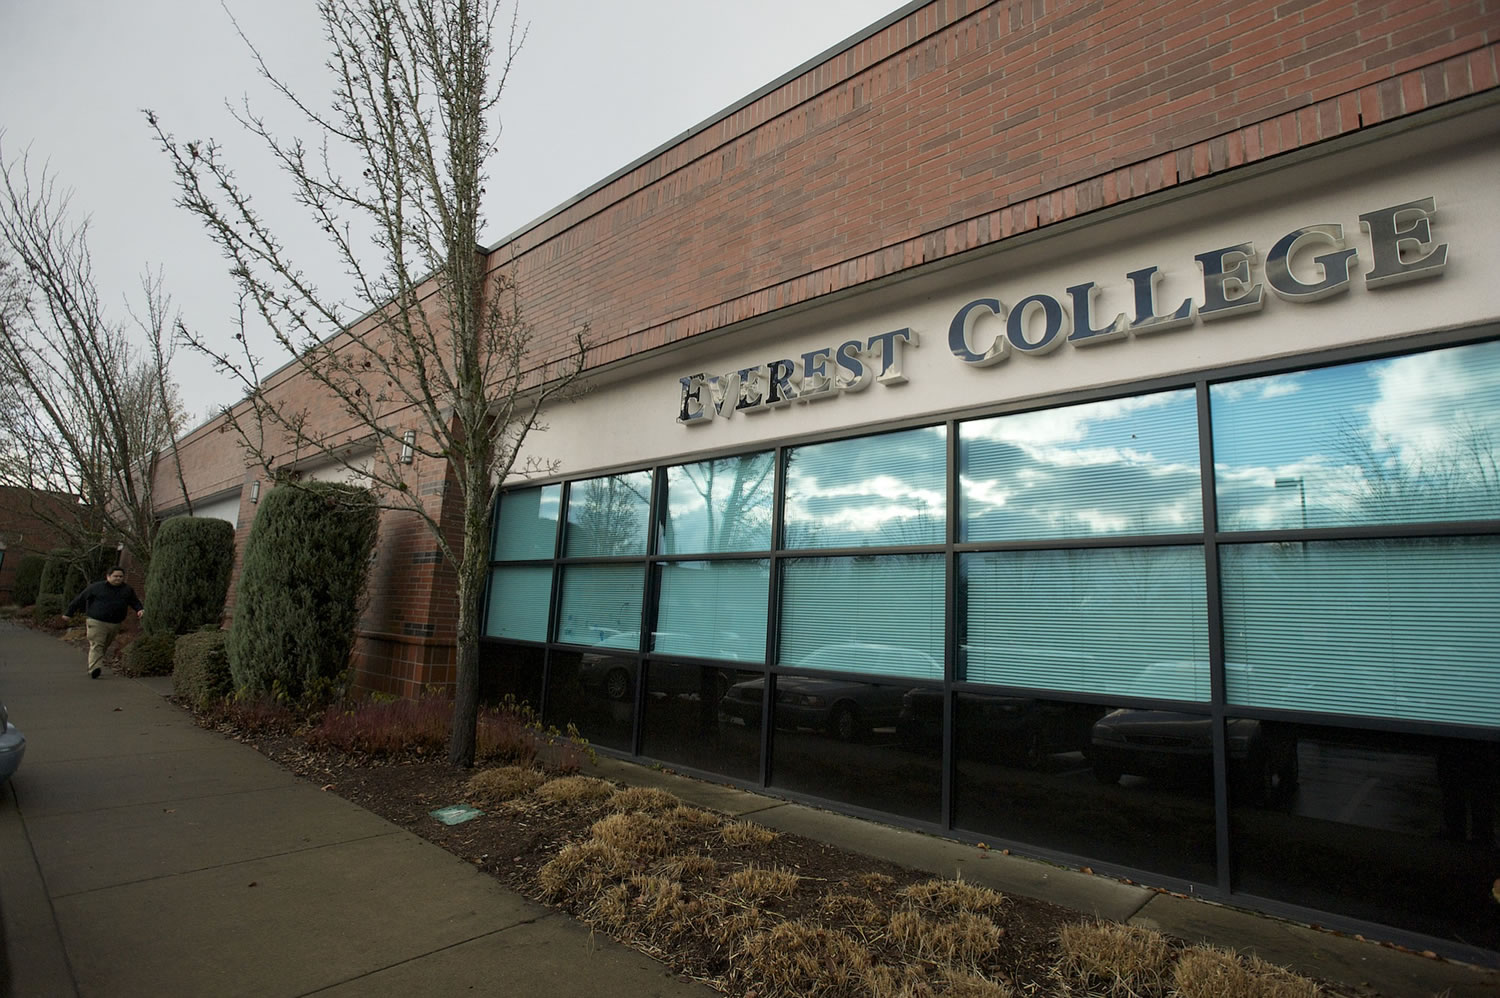 Columbian files
The Everest College campus in Vancouver.